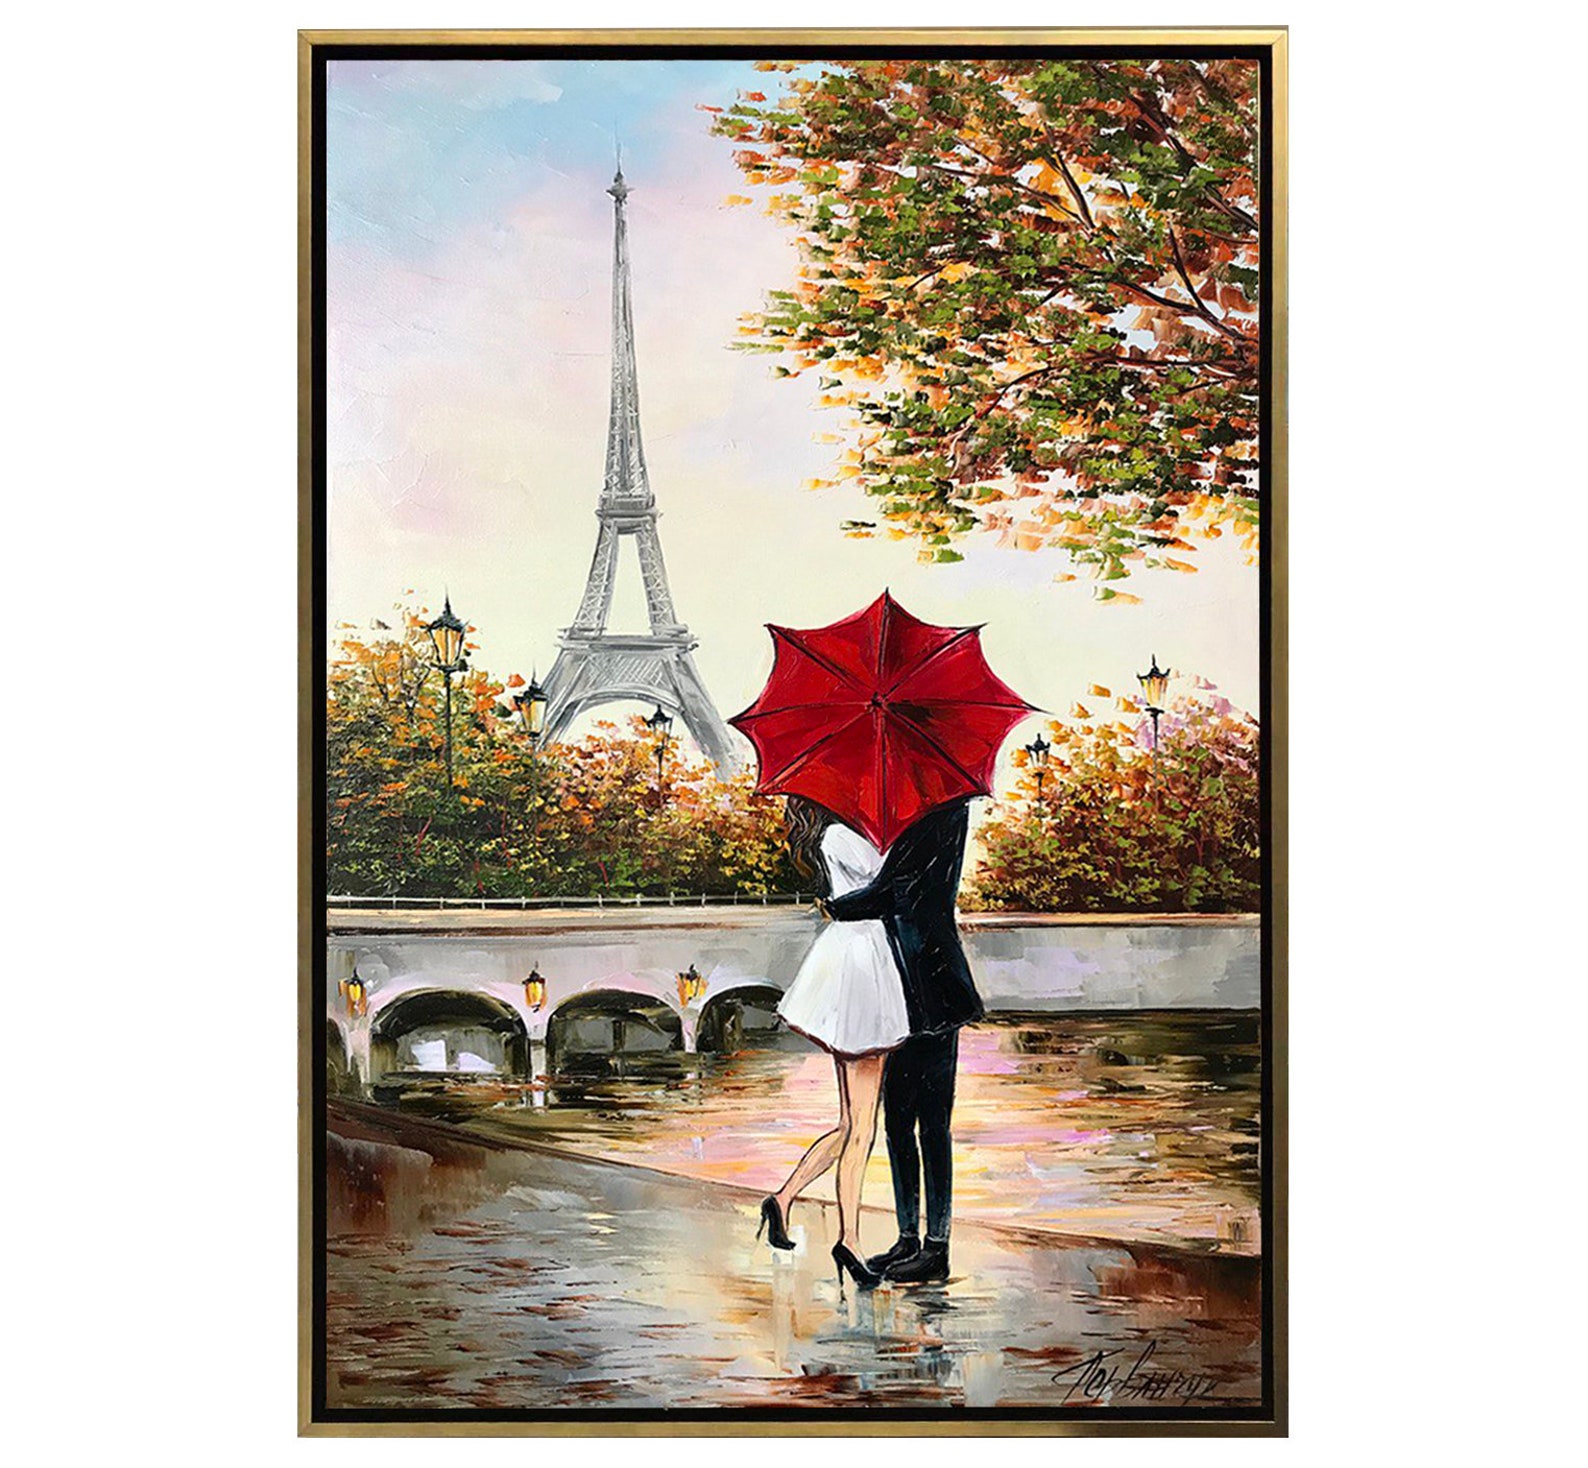 Couple Kissing Under Red Umbrella Painting Romantic Wall Art | Etsy